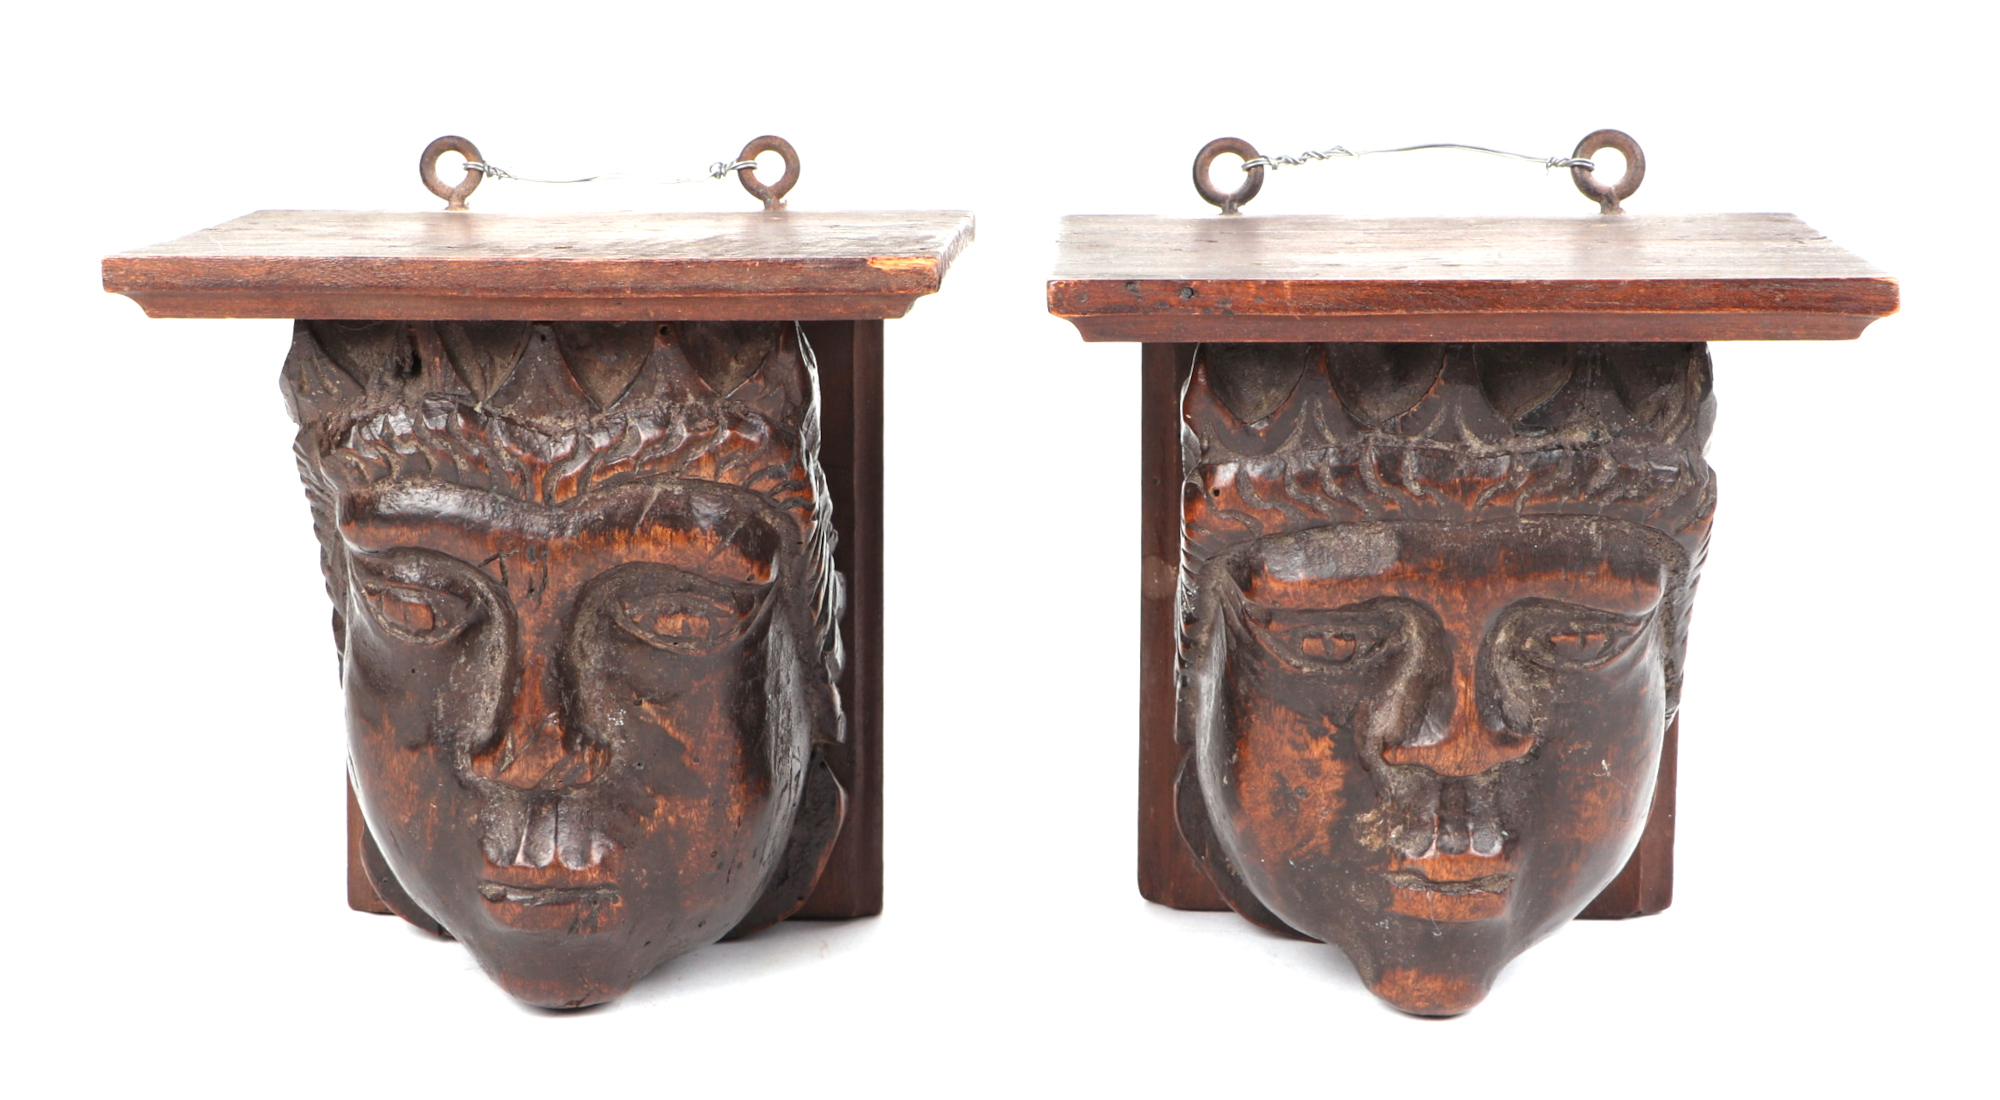 A pair of carved fruit wood corbels, in the form of a King and Queen, possible medieval, each 14cm